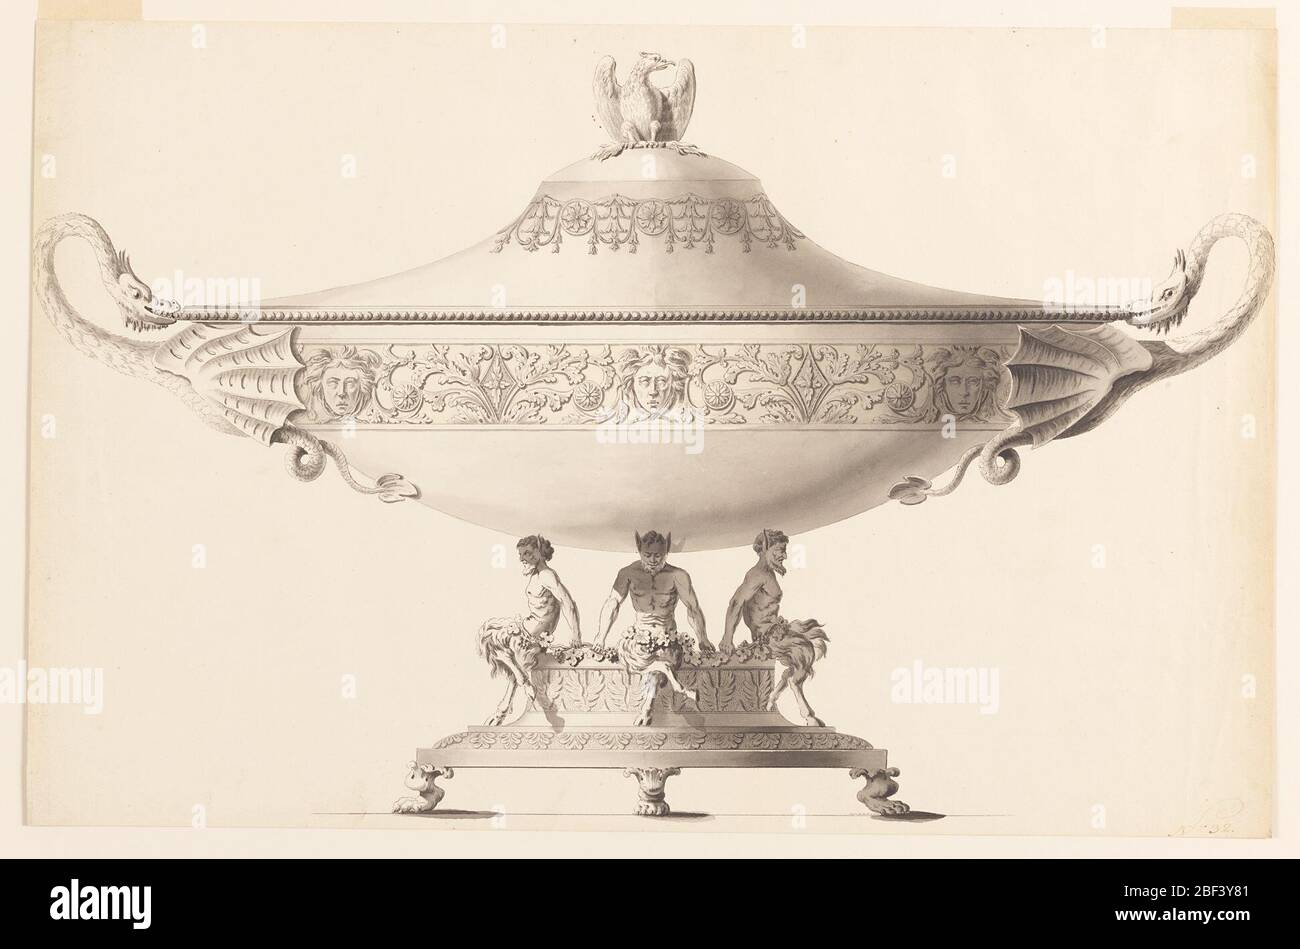 Design for a Tureen. Three satyrs are shown seated upon a pedestal and supporting with their heads the ovoidal bowl which is decorated with a frieze in which Medusae alternate with an acanthus plant with a rosette in the center. Stock Photo